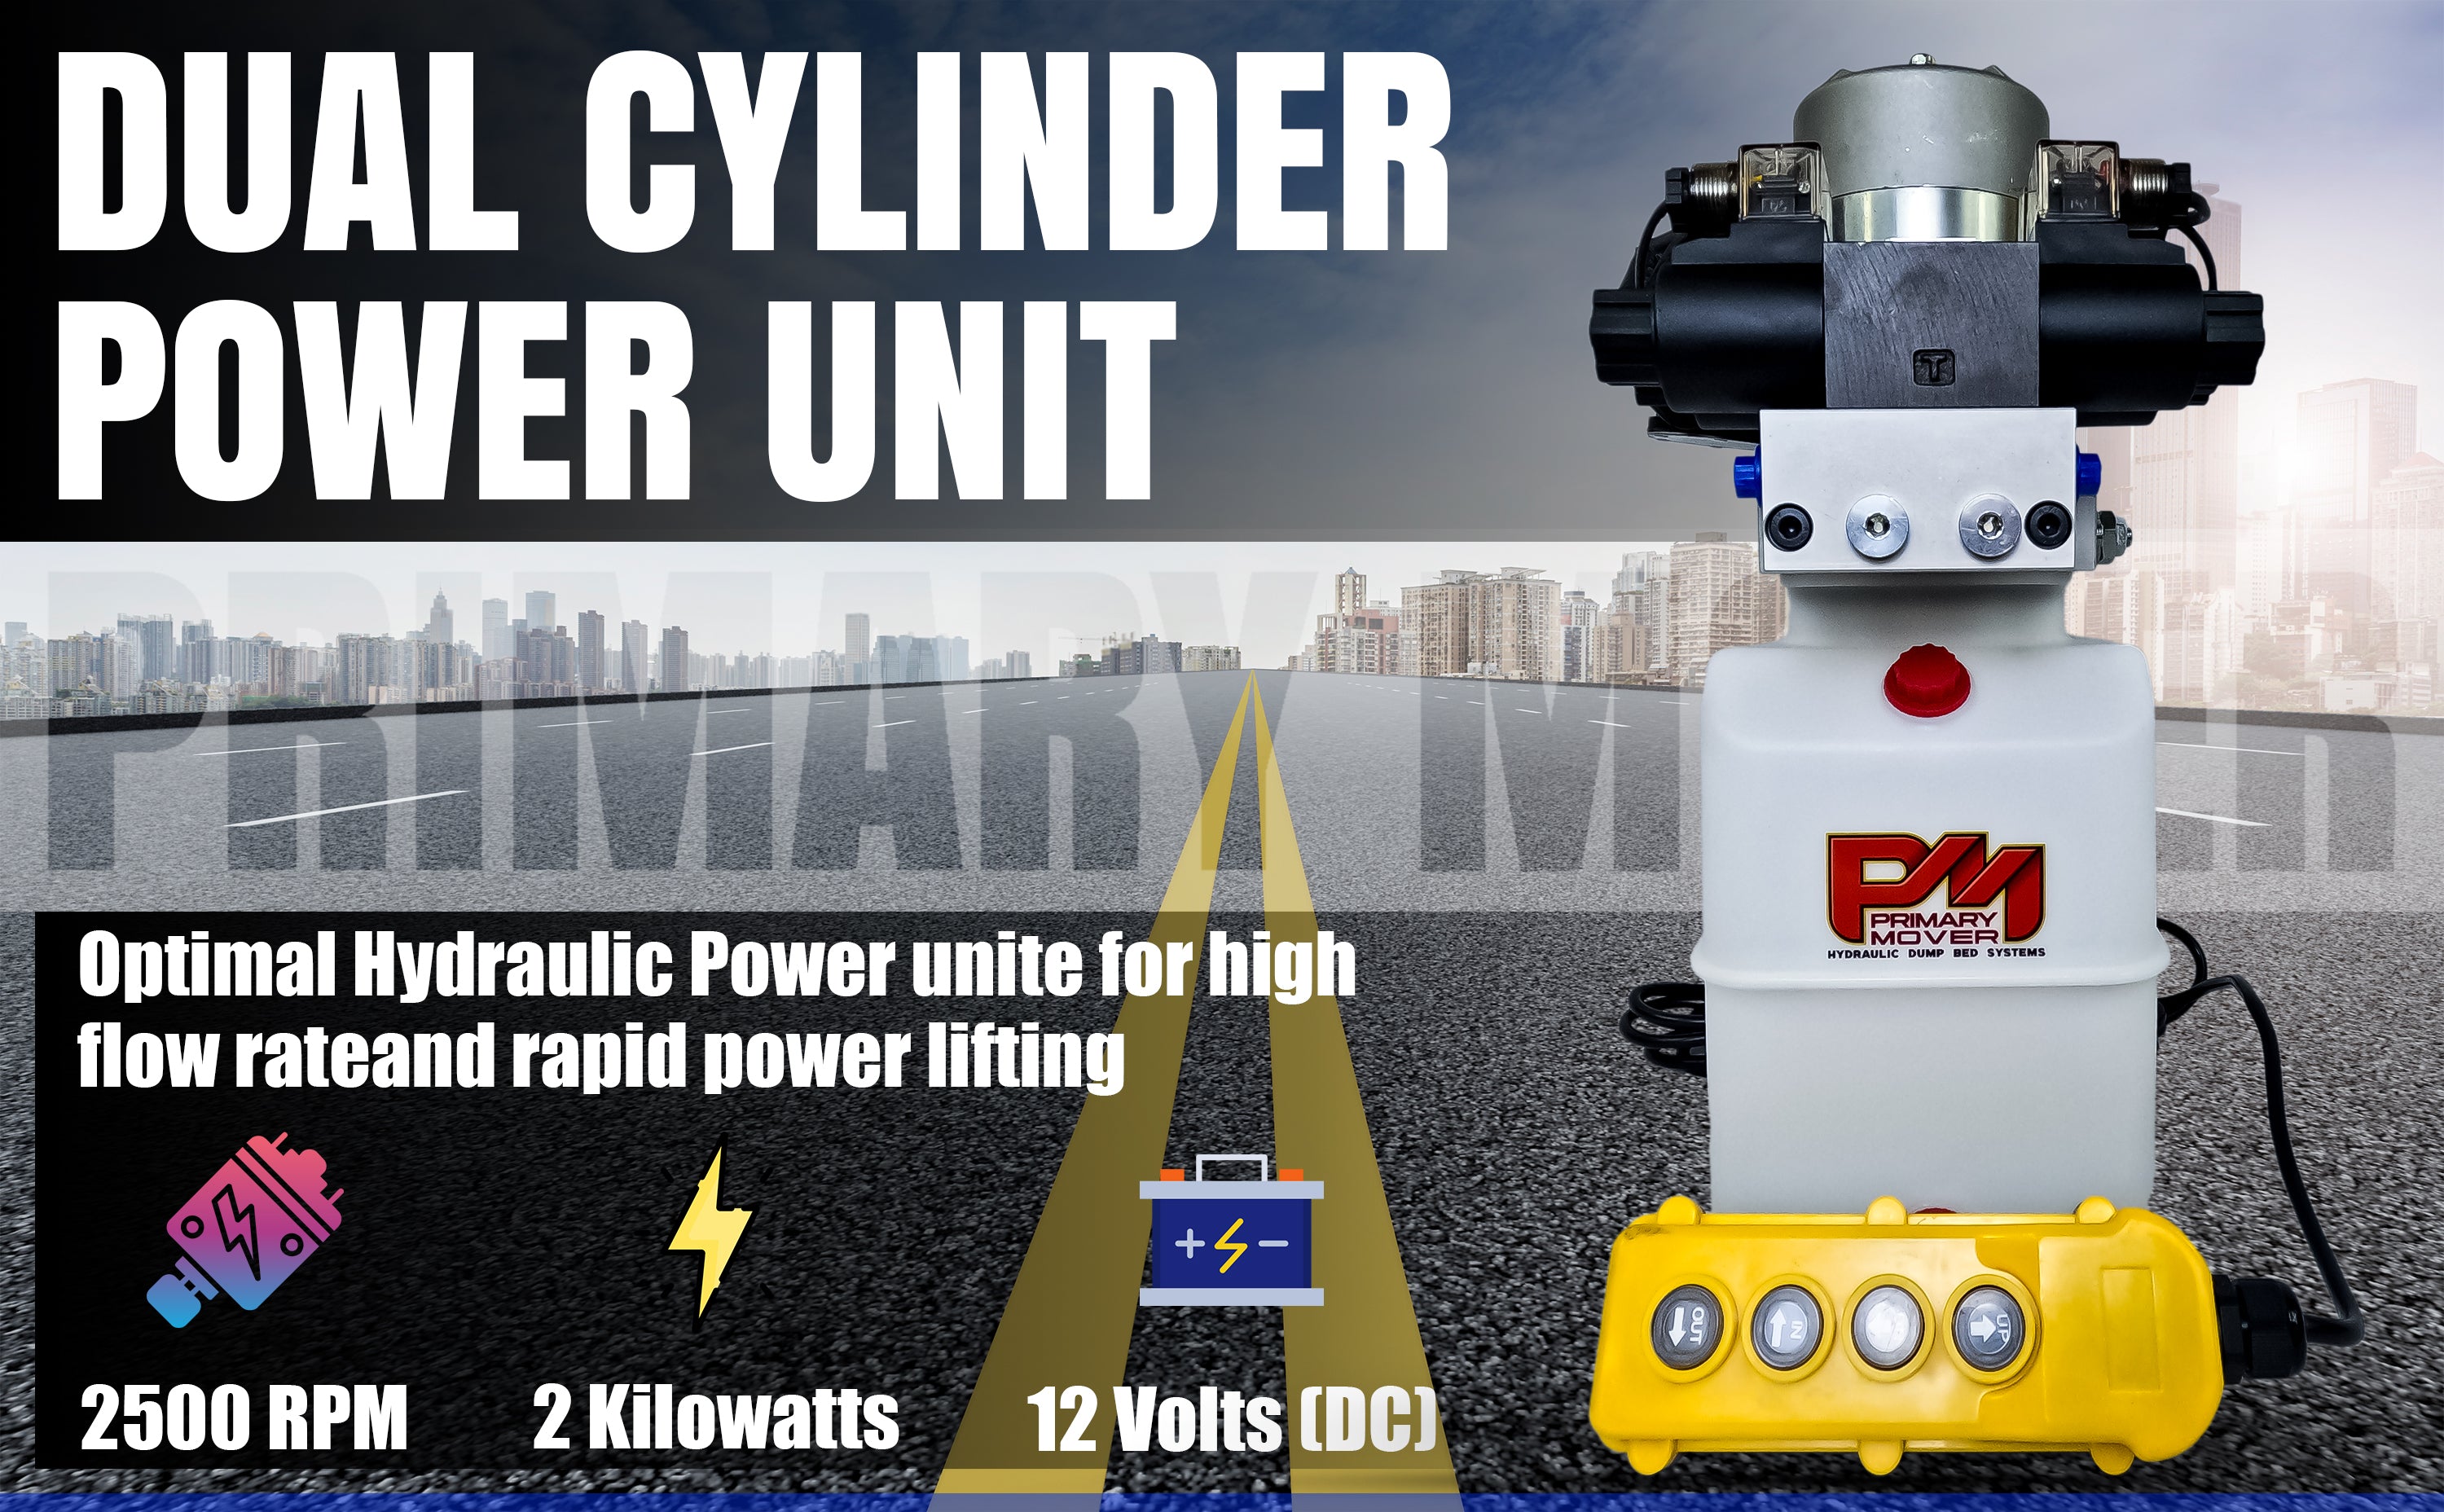 Primary Mover 12V Dual Double-Acting Hydraulic Power Unit in action on a road, showcasing quad power capability for dump trailers and trucks.